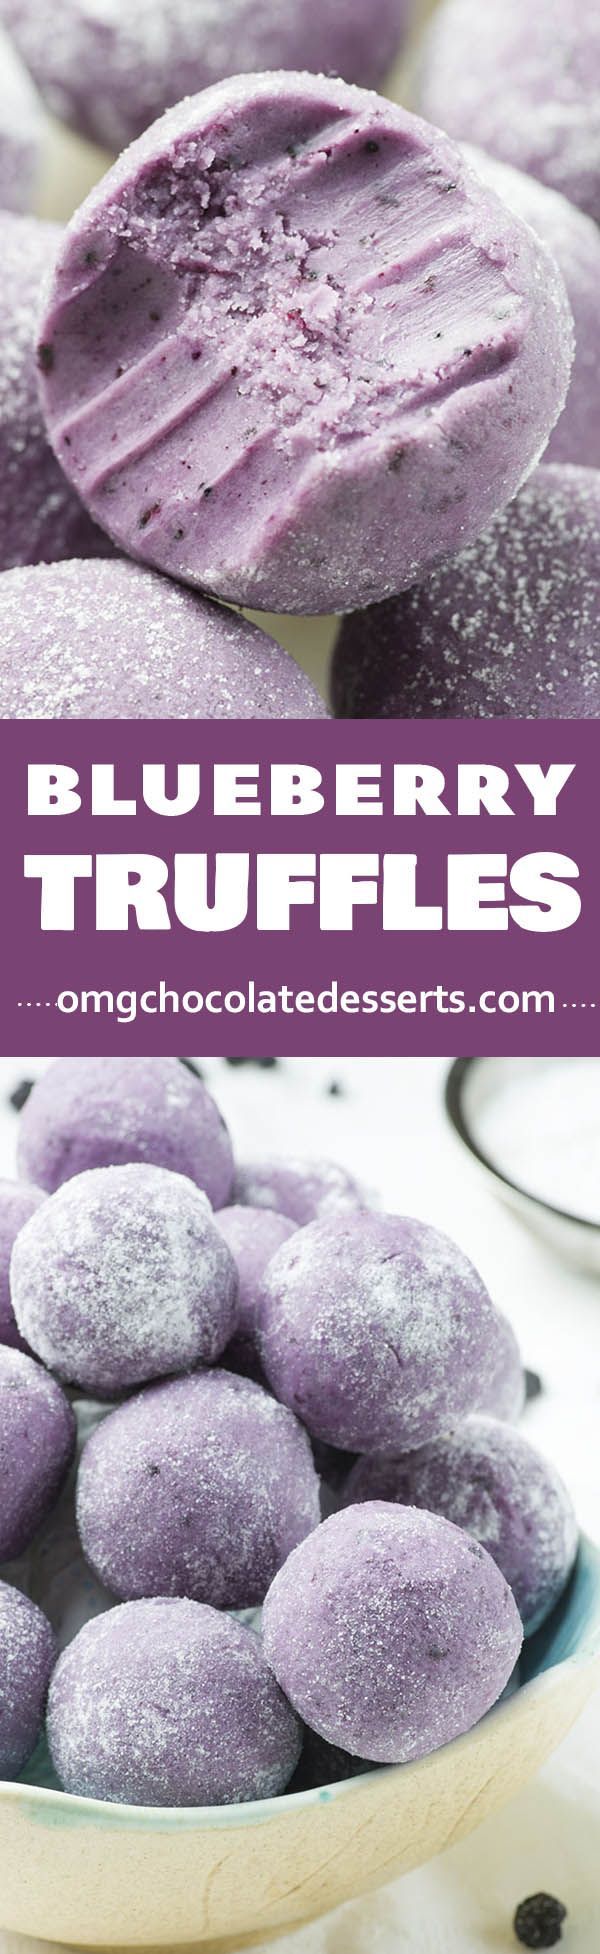 Blueberry Truffles – no bake dessert recipe ! This easy truffle recipe are actually bites of melted white chocolate and dried